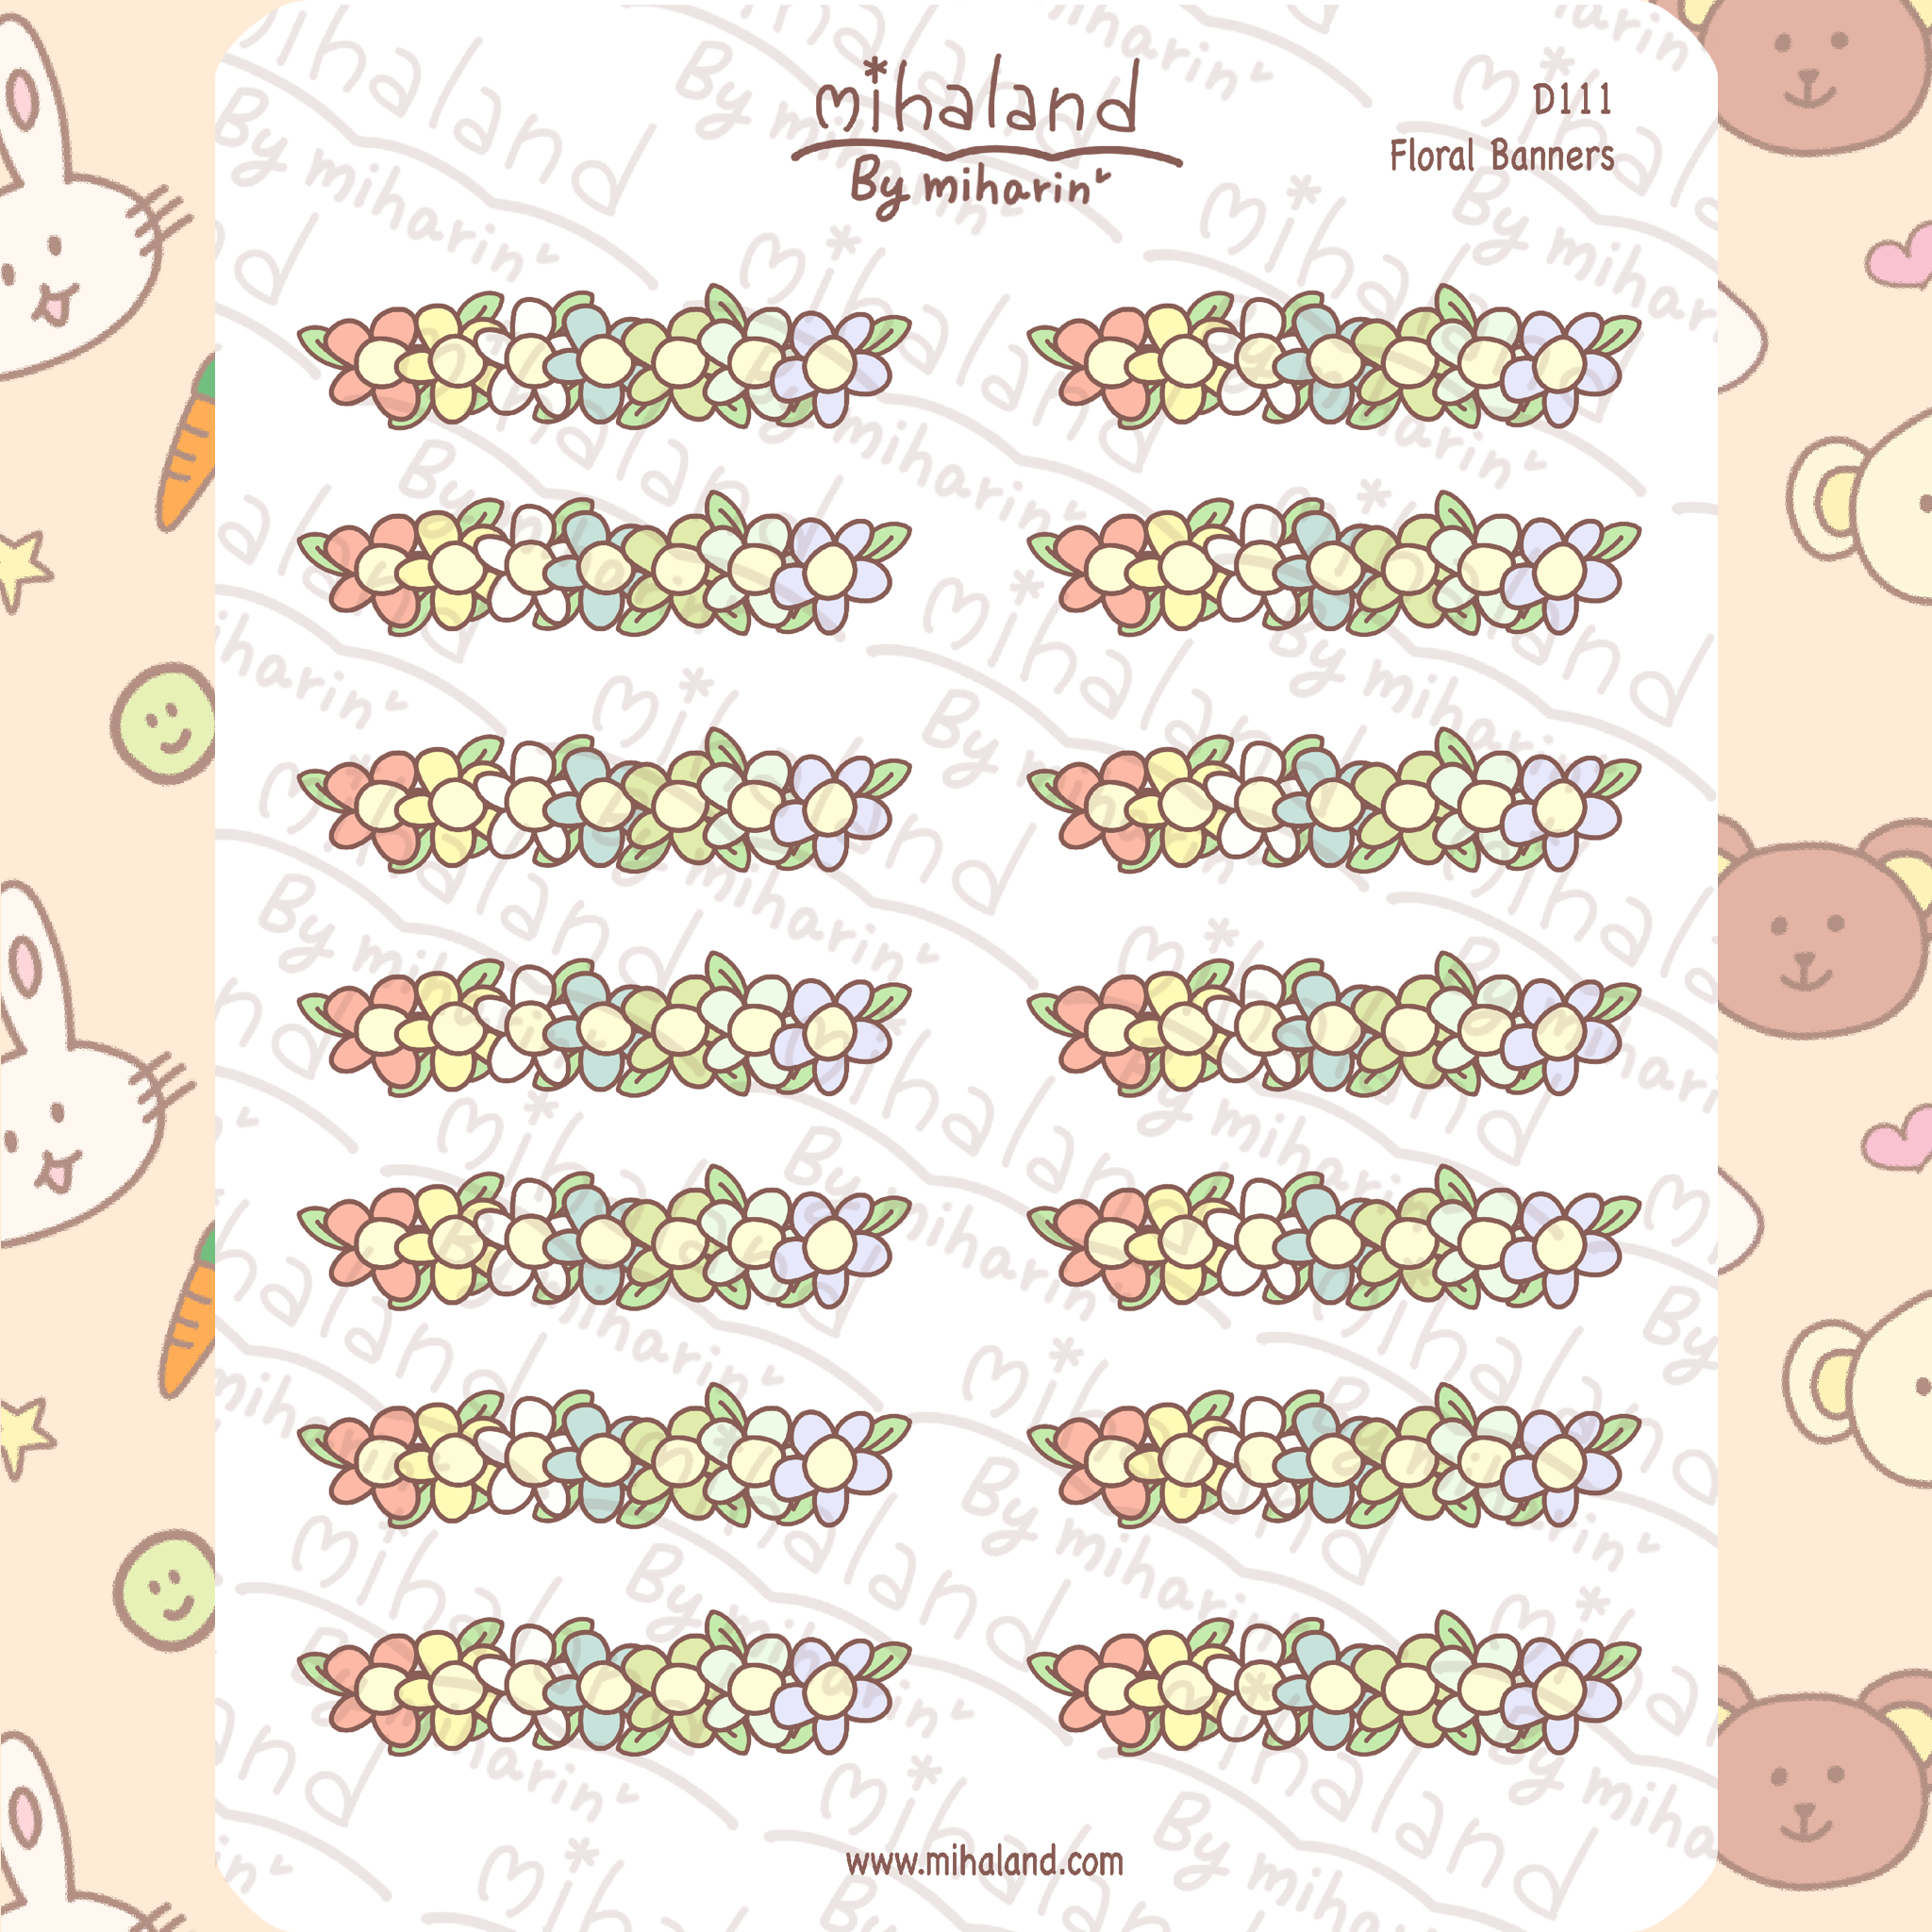 Floral Banners Planner Stickers (D111)